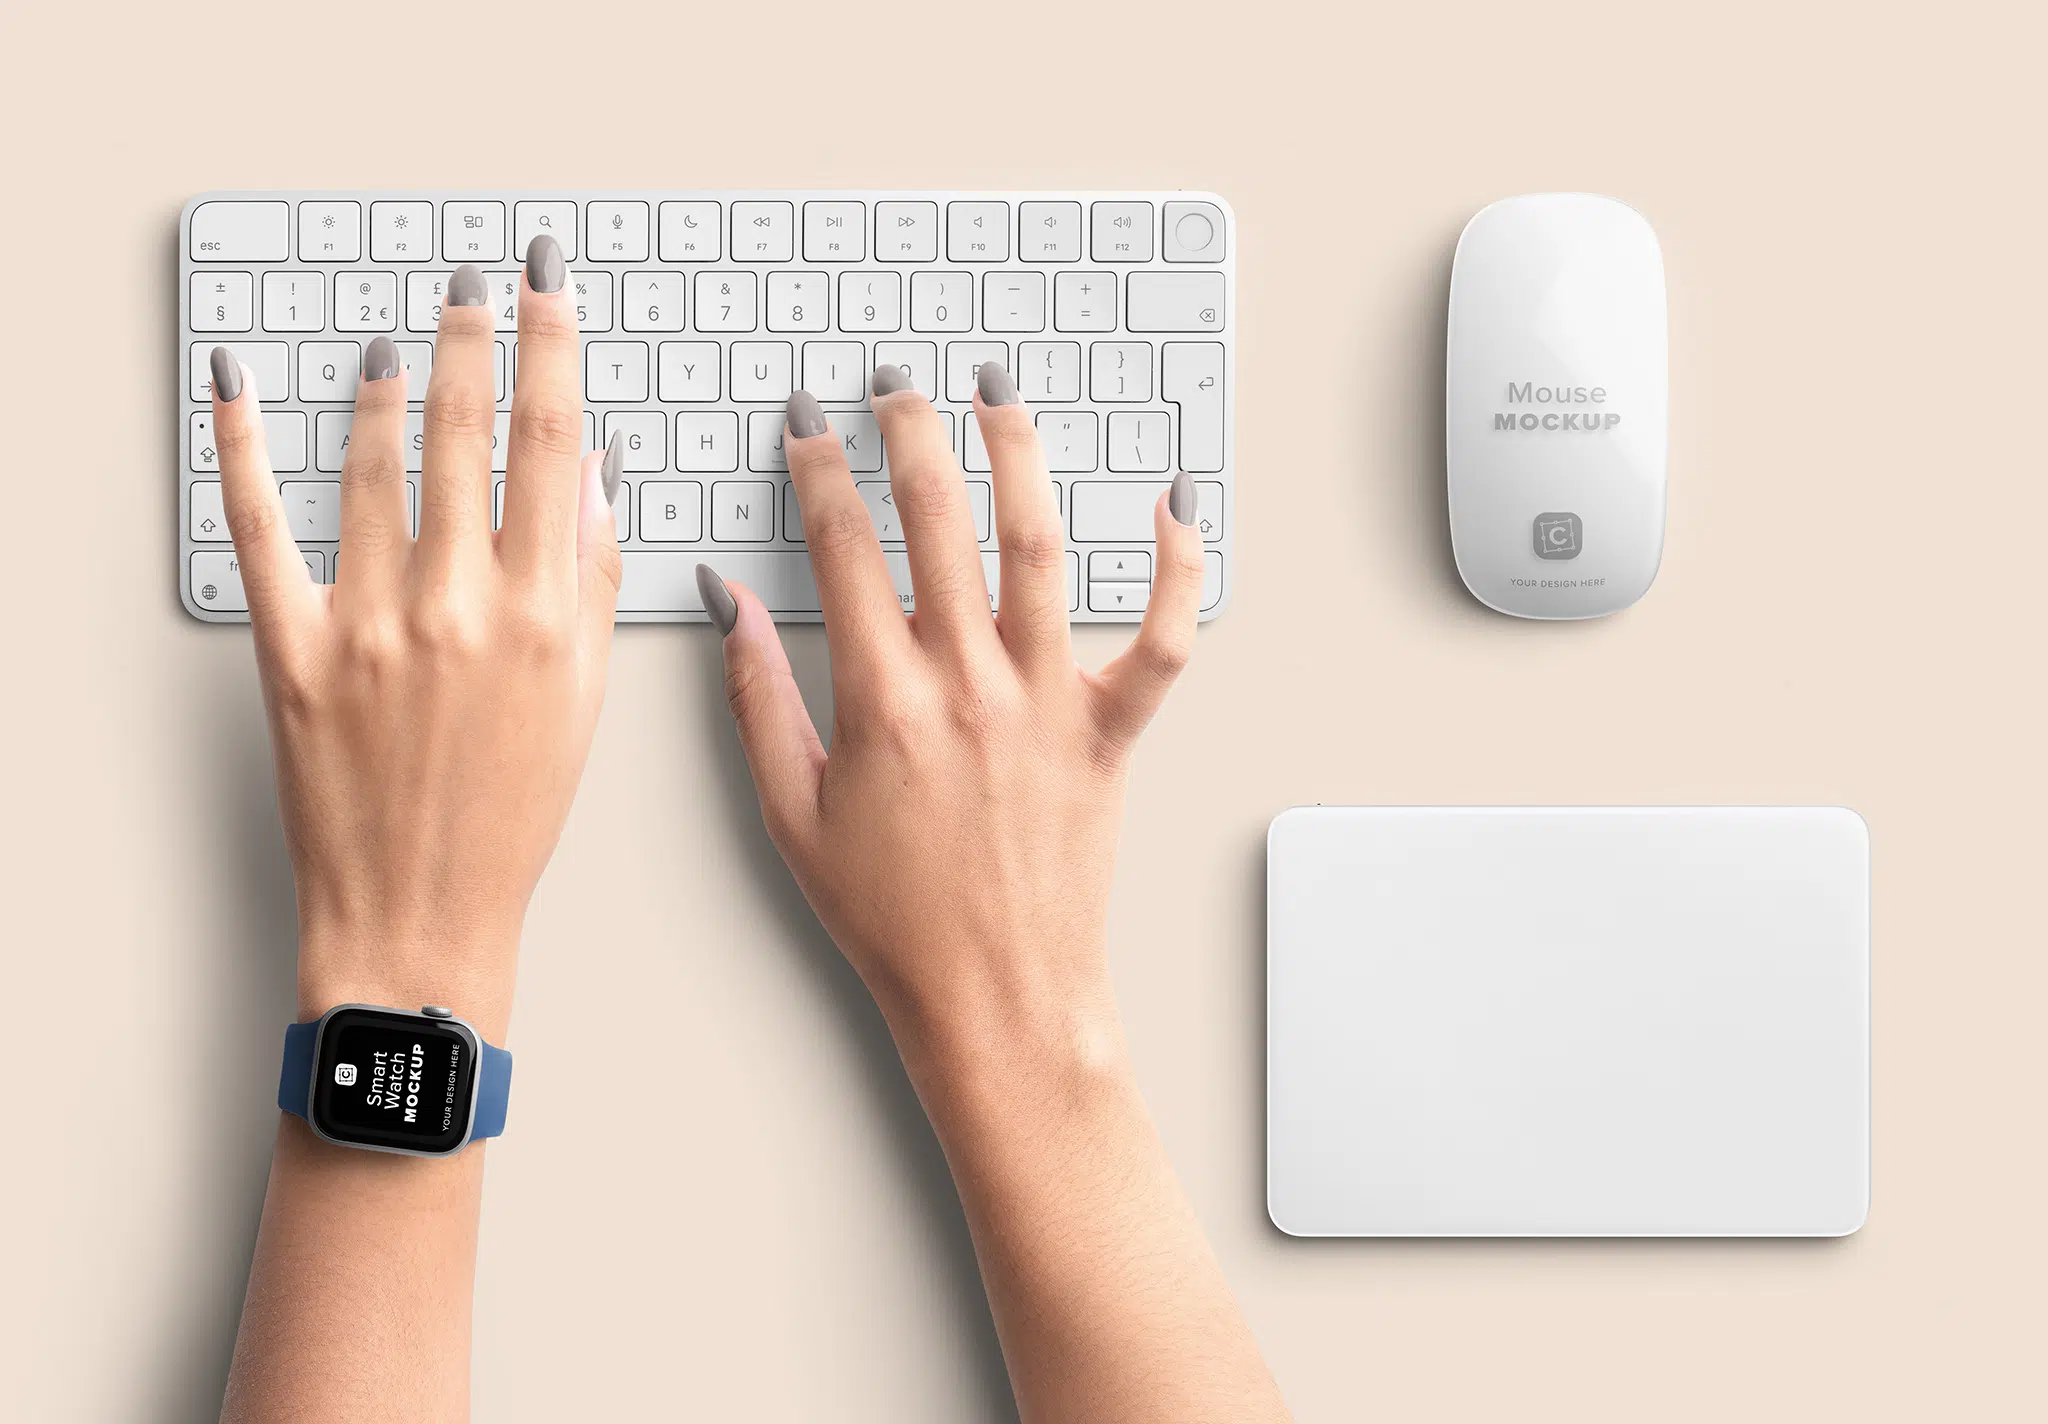 Desk Mockup Scene Creator Hands and Peripherals: 5 items including Mouse, Keyboard, Trackpad, Right Hand with Smart Watch and Left Hand